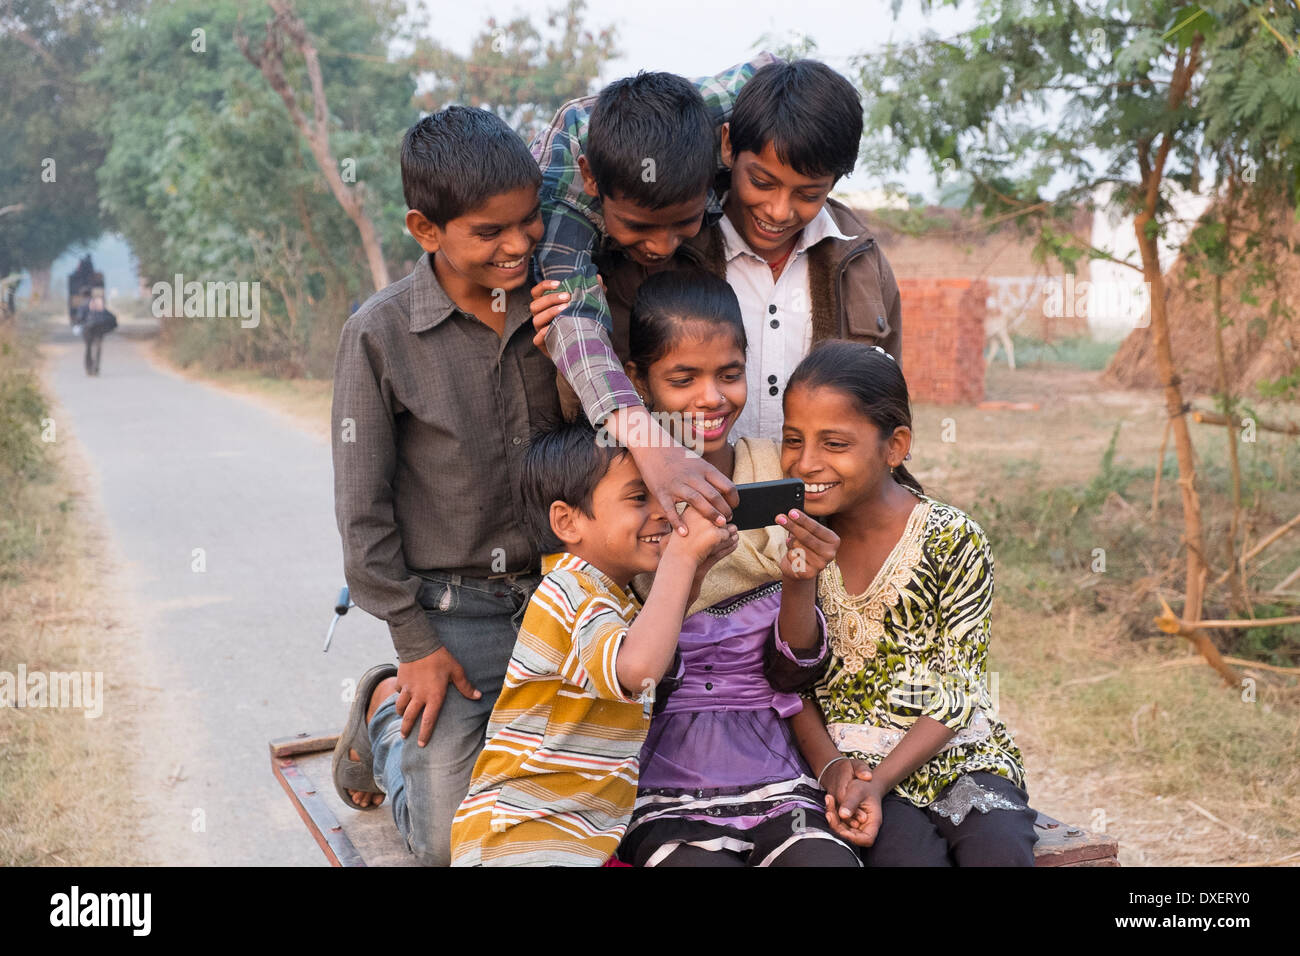 India, Uttar Pradesh, Agra, six children riding on the back of a bicycle trailer looking at a smart phone Stock Photo